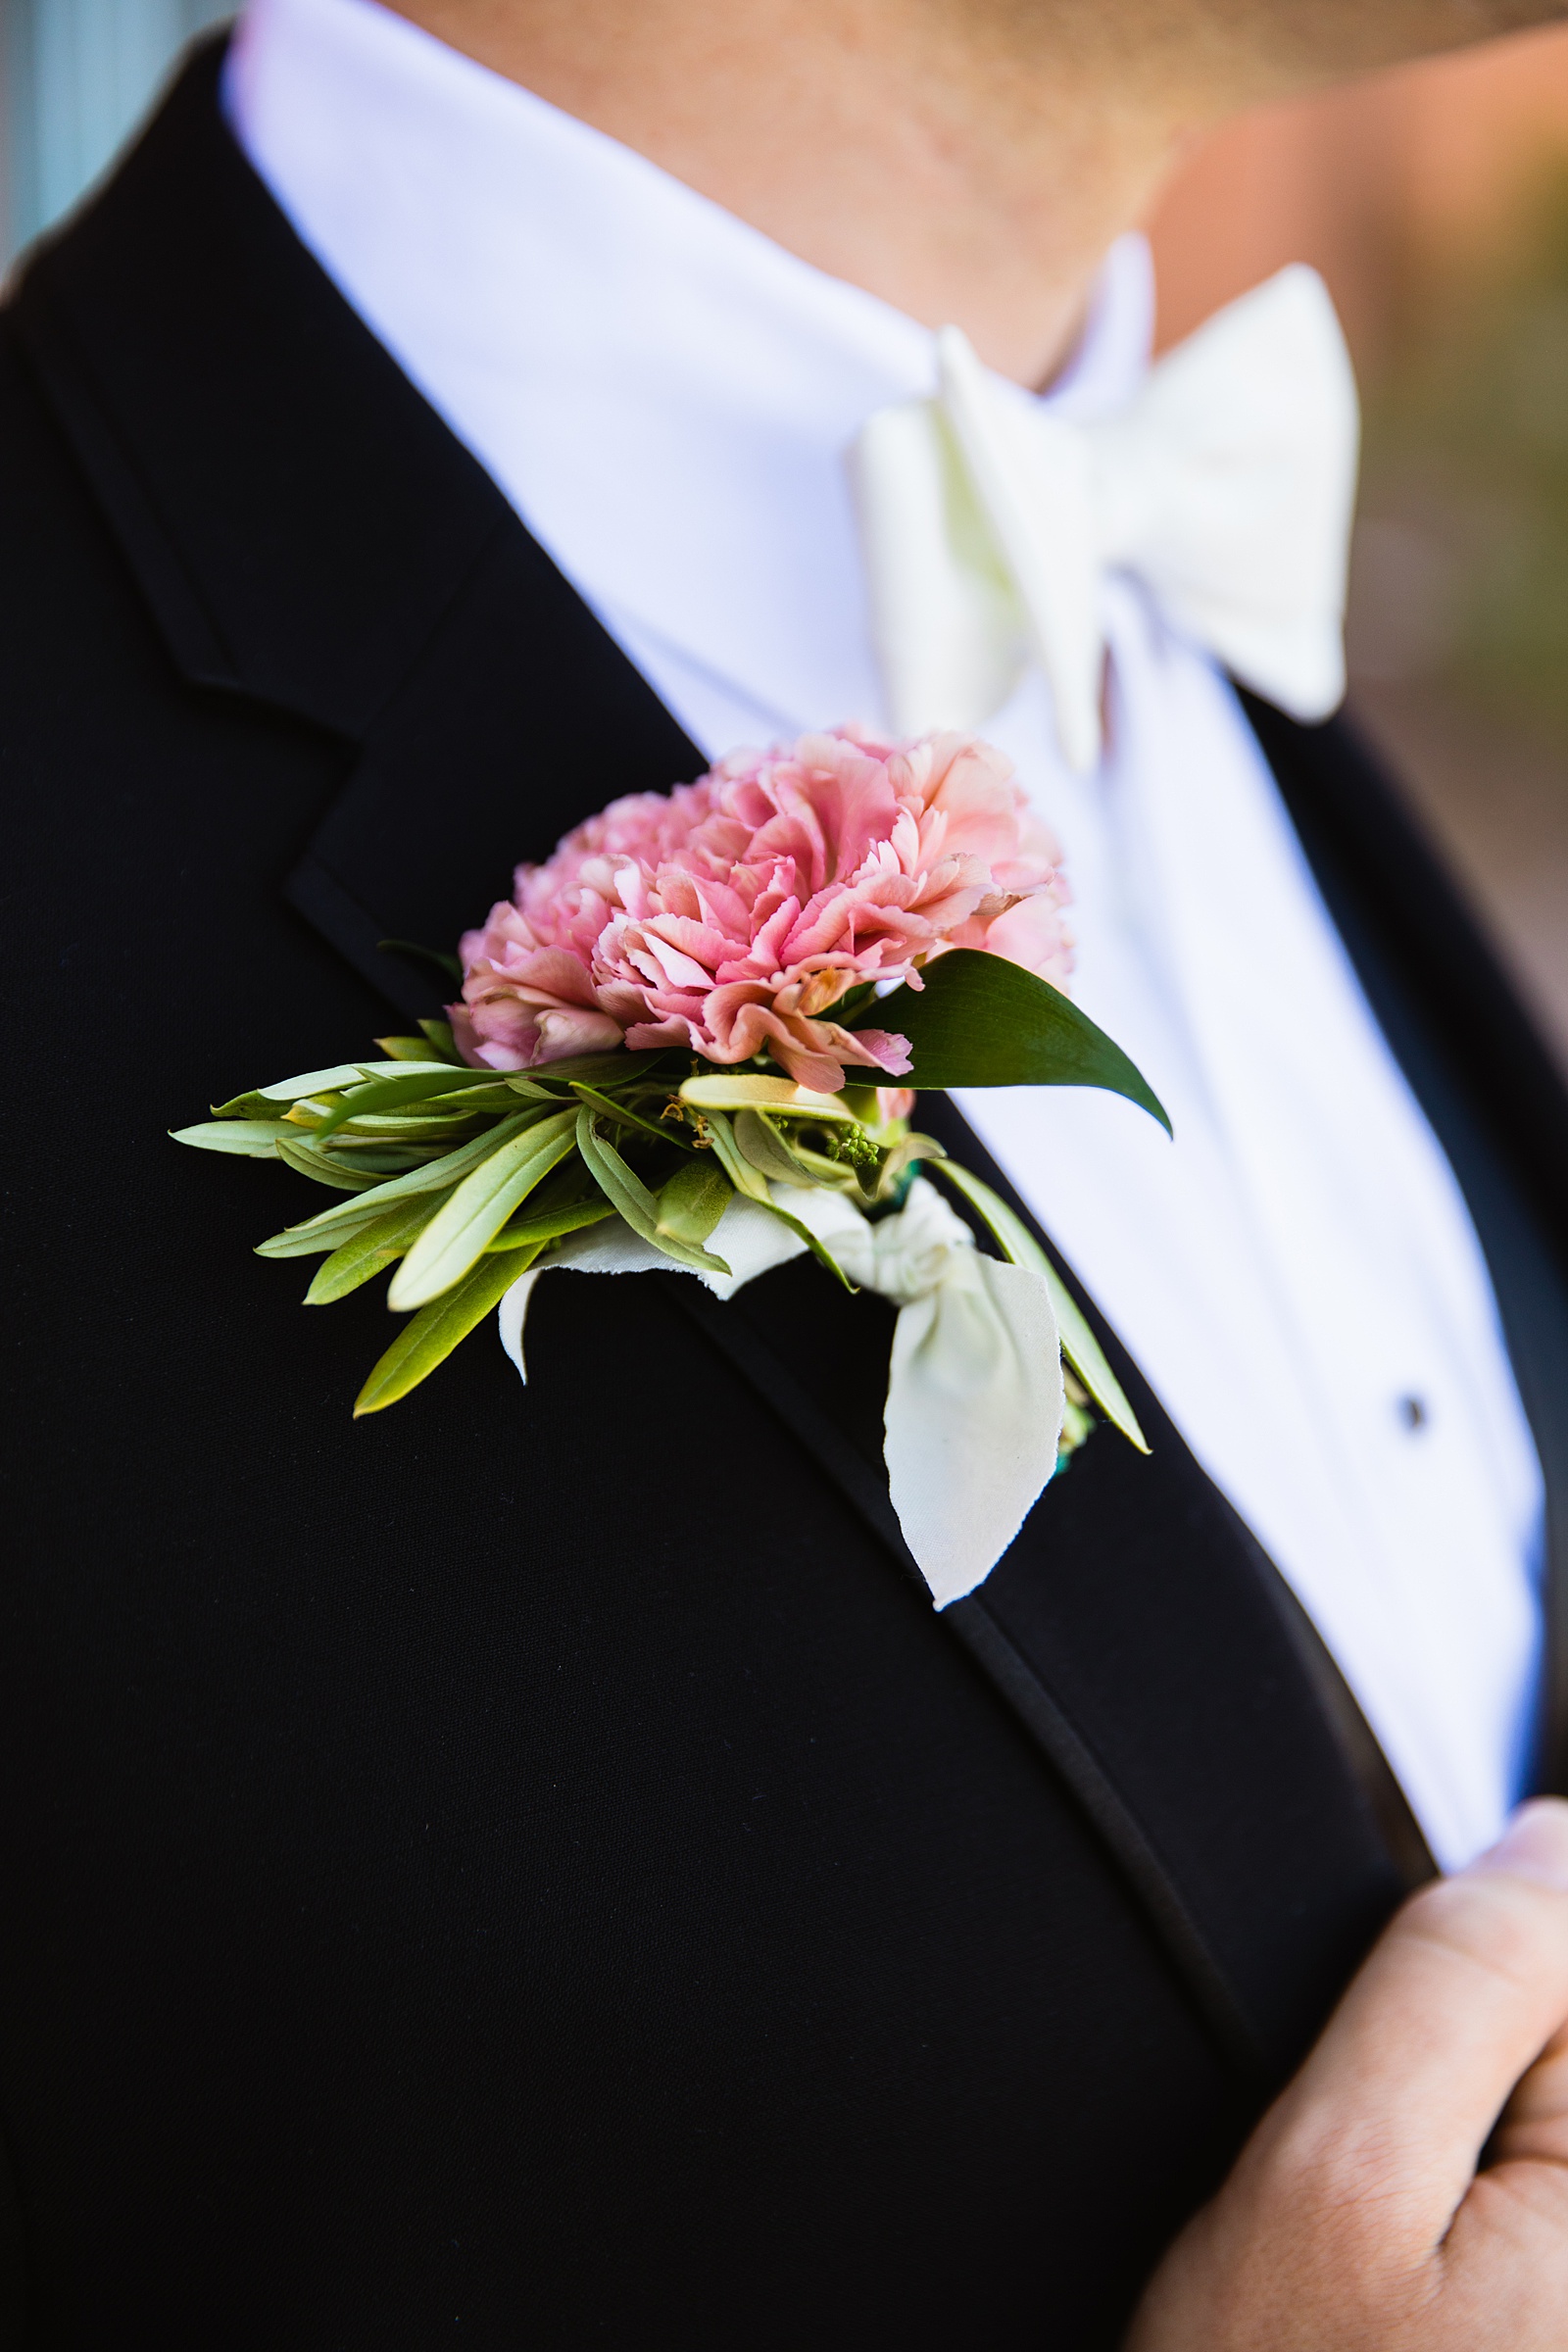 Groom's wedding day details of his boutonniere by PMA Photography.